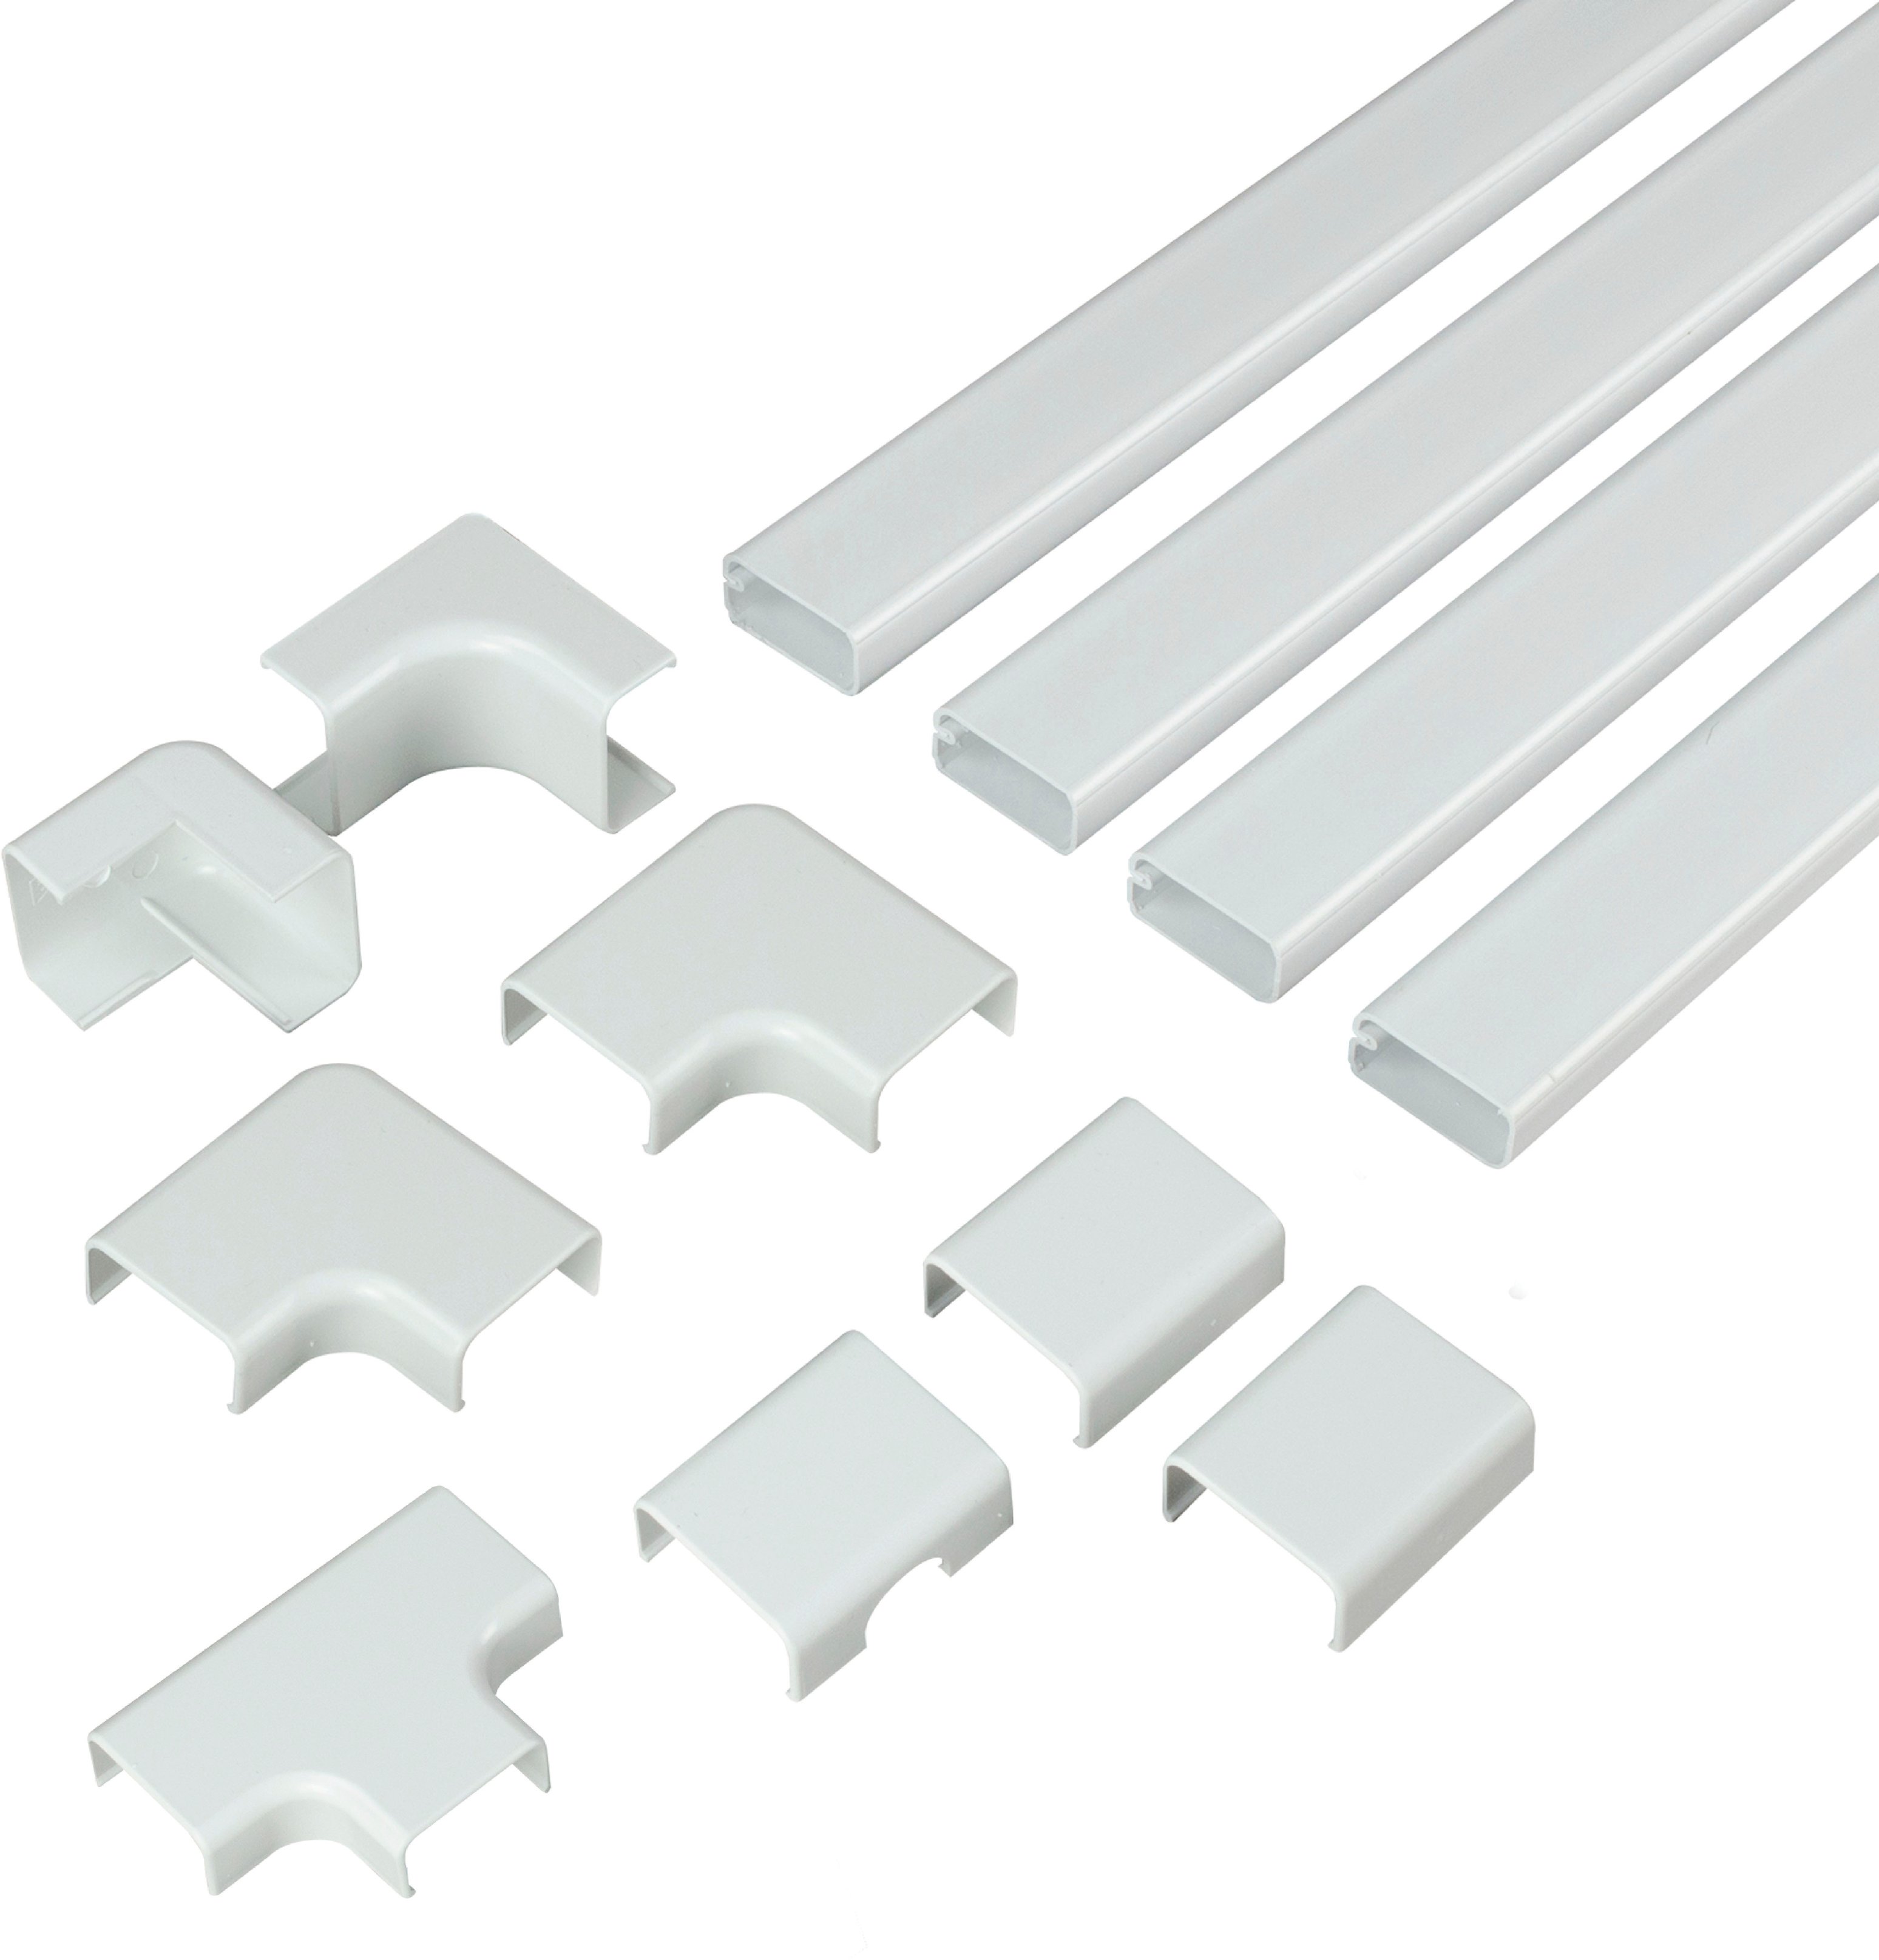 Sanus On-Wall Cable Concealer Cord Cover Kit for Mounted TVs - White - 1 Each 6537749